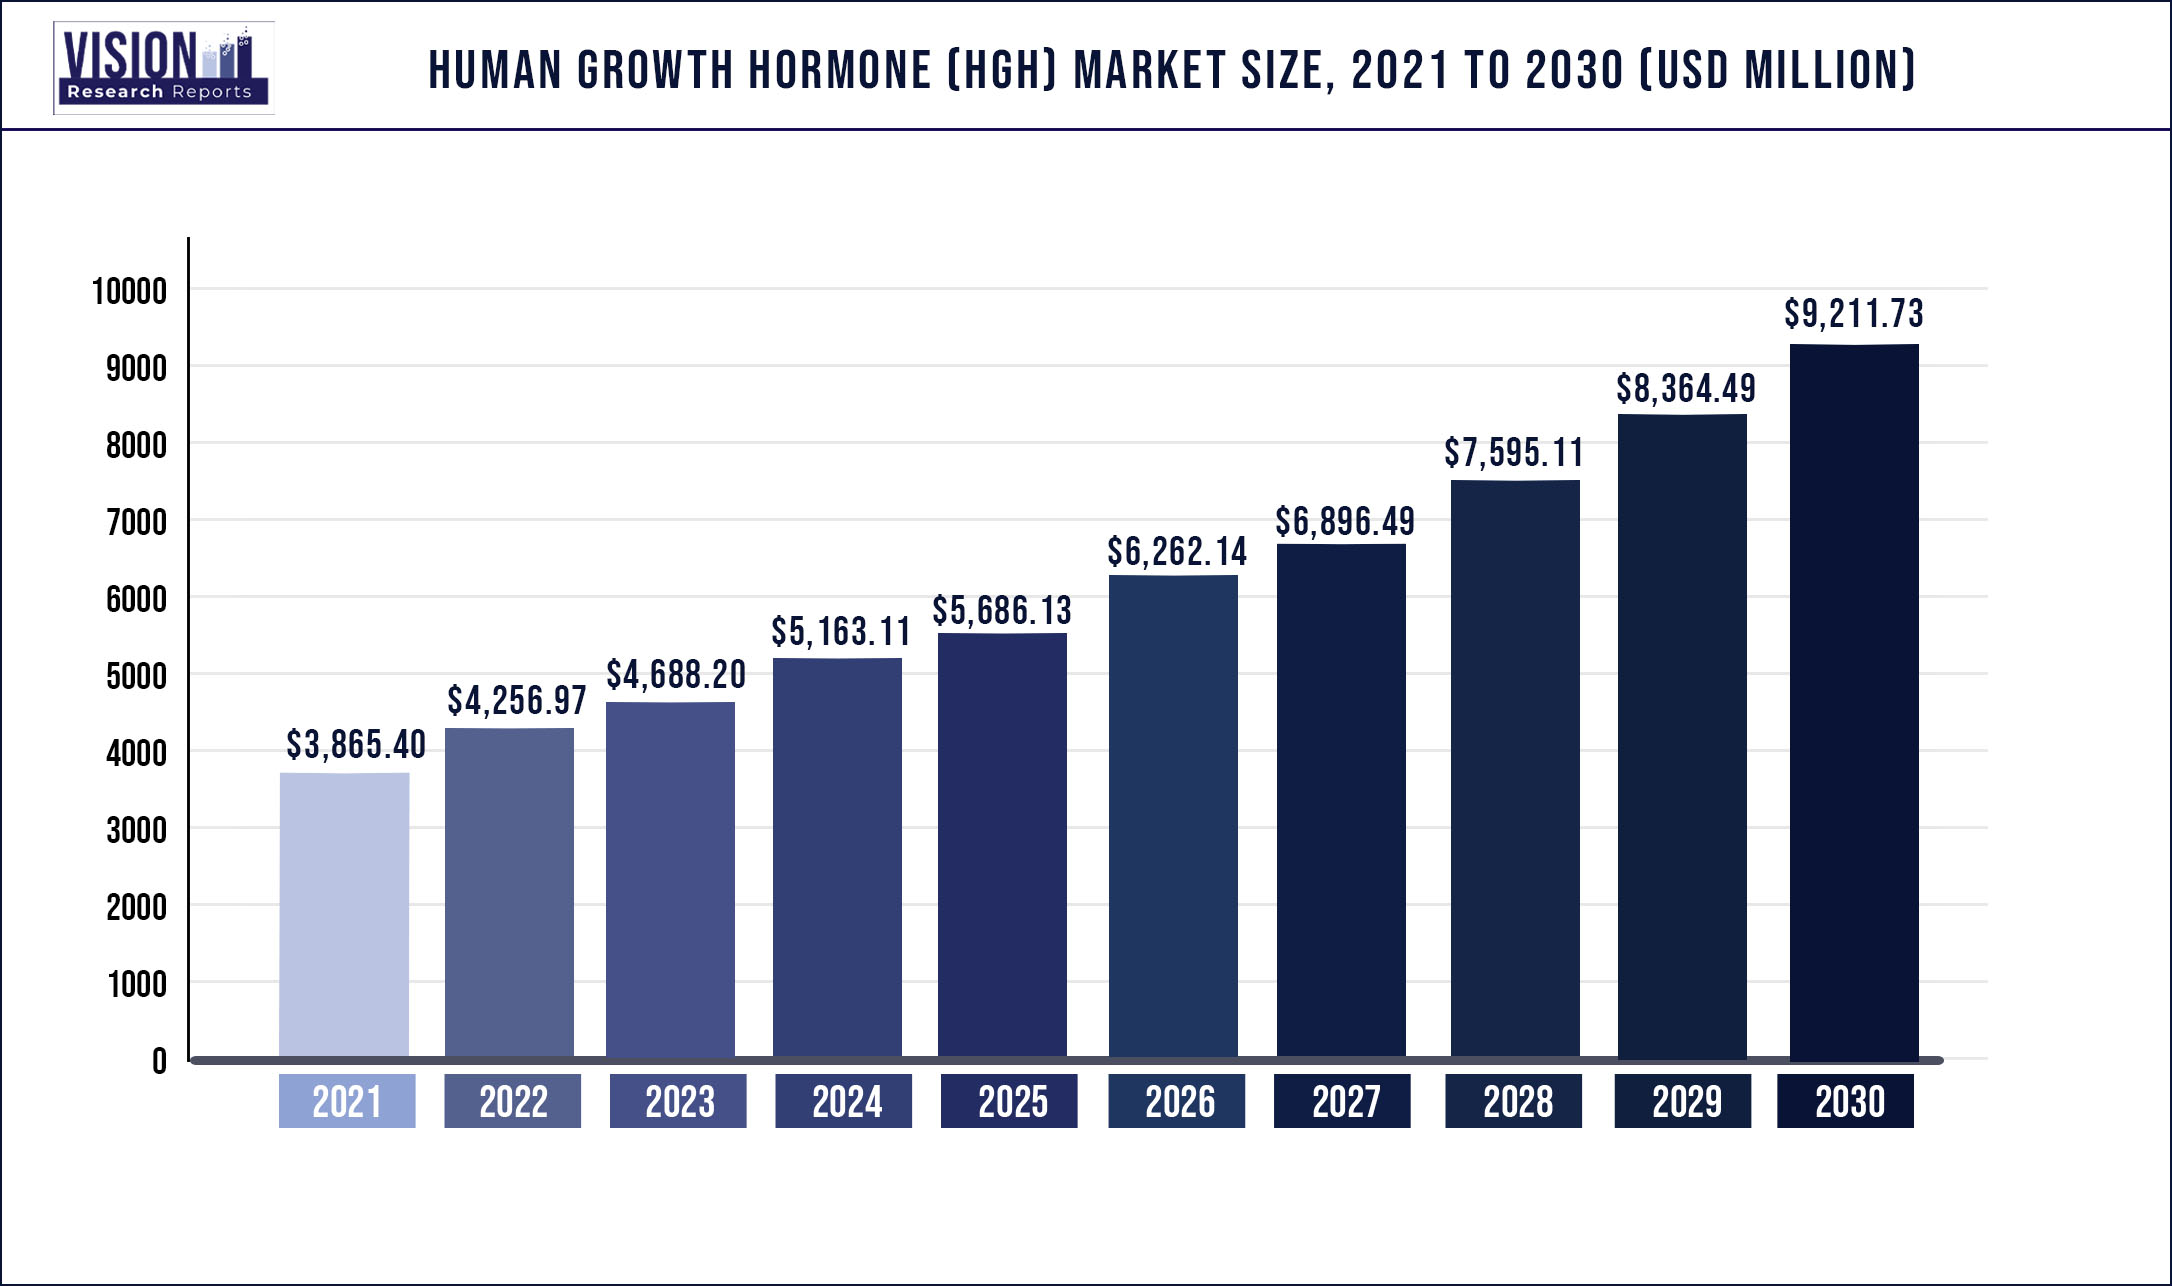 Human Growth Hormone (hGH) Market Size 2021 to 2030